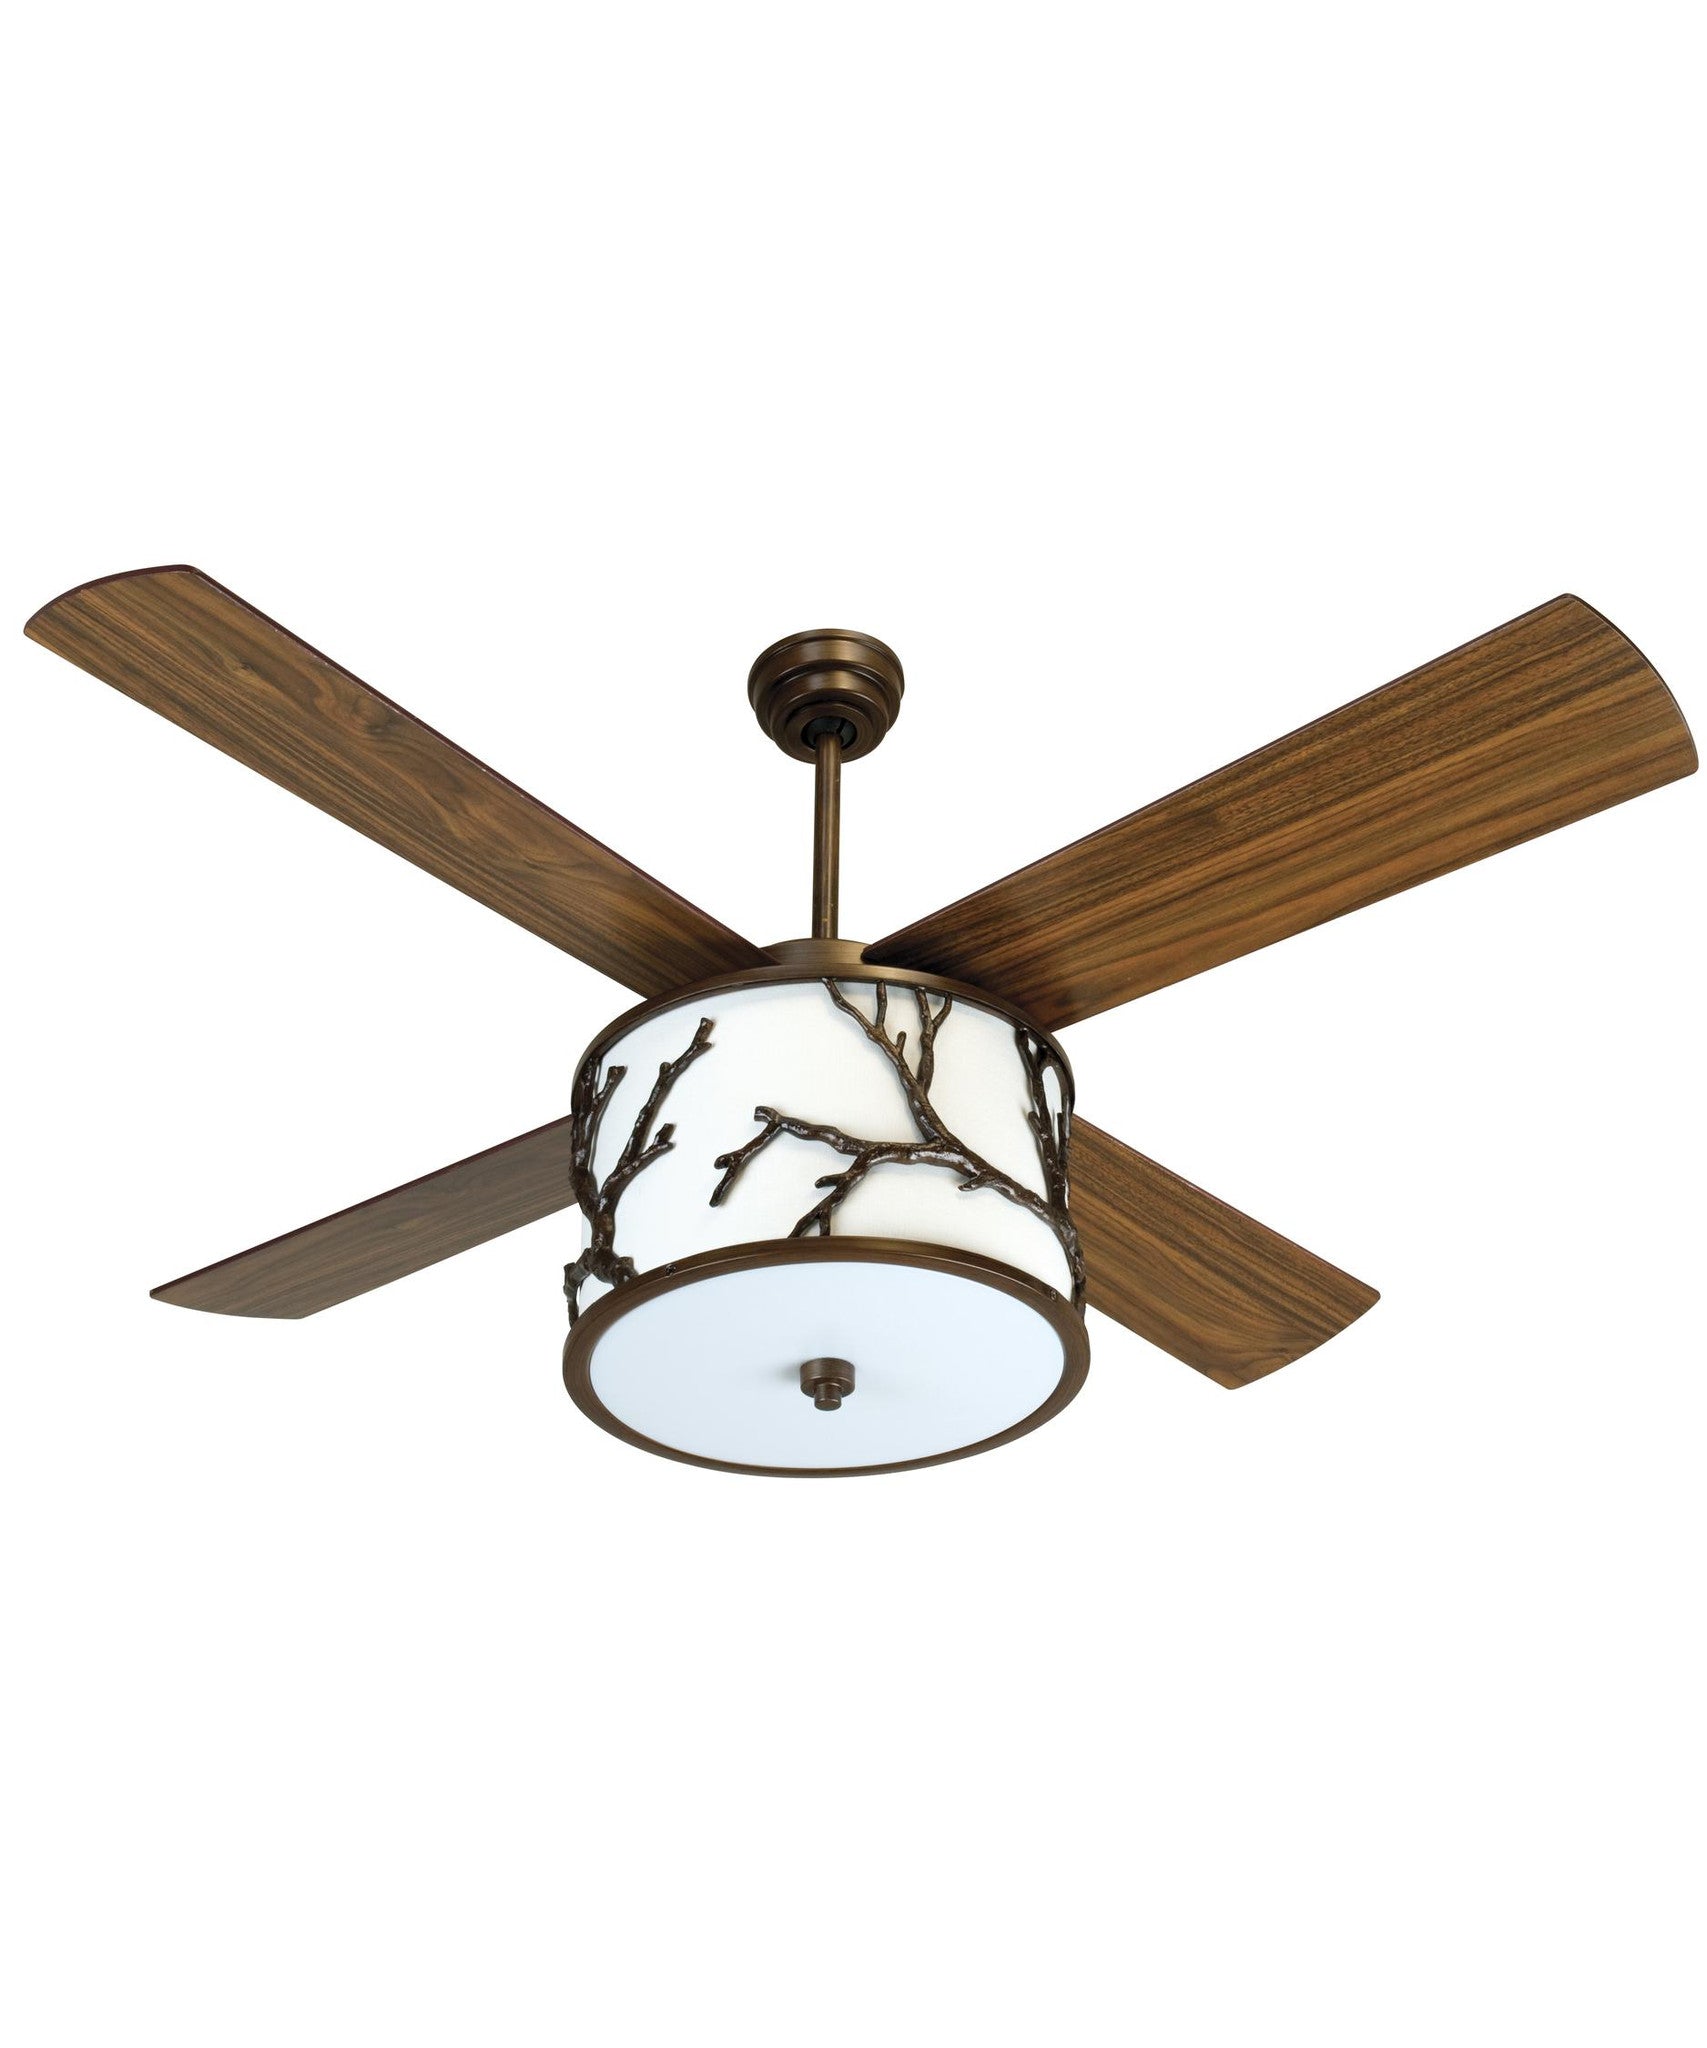 Craftmade LB56DC Lauren Branch Collection Ceiling Fan in Dark Coffee Finish